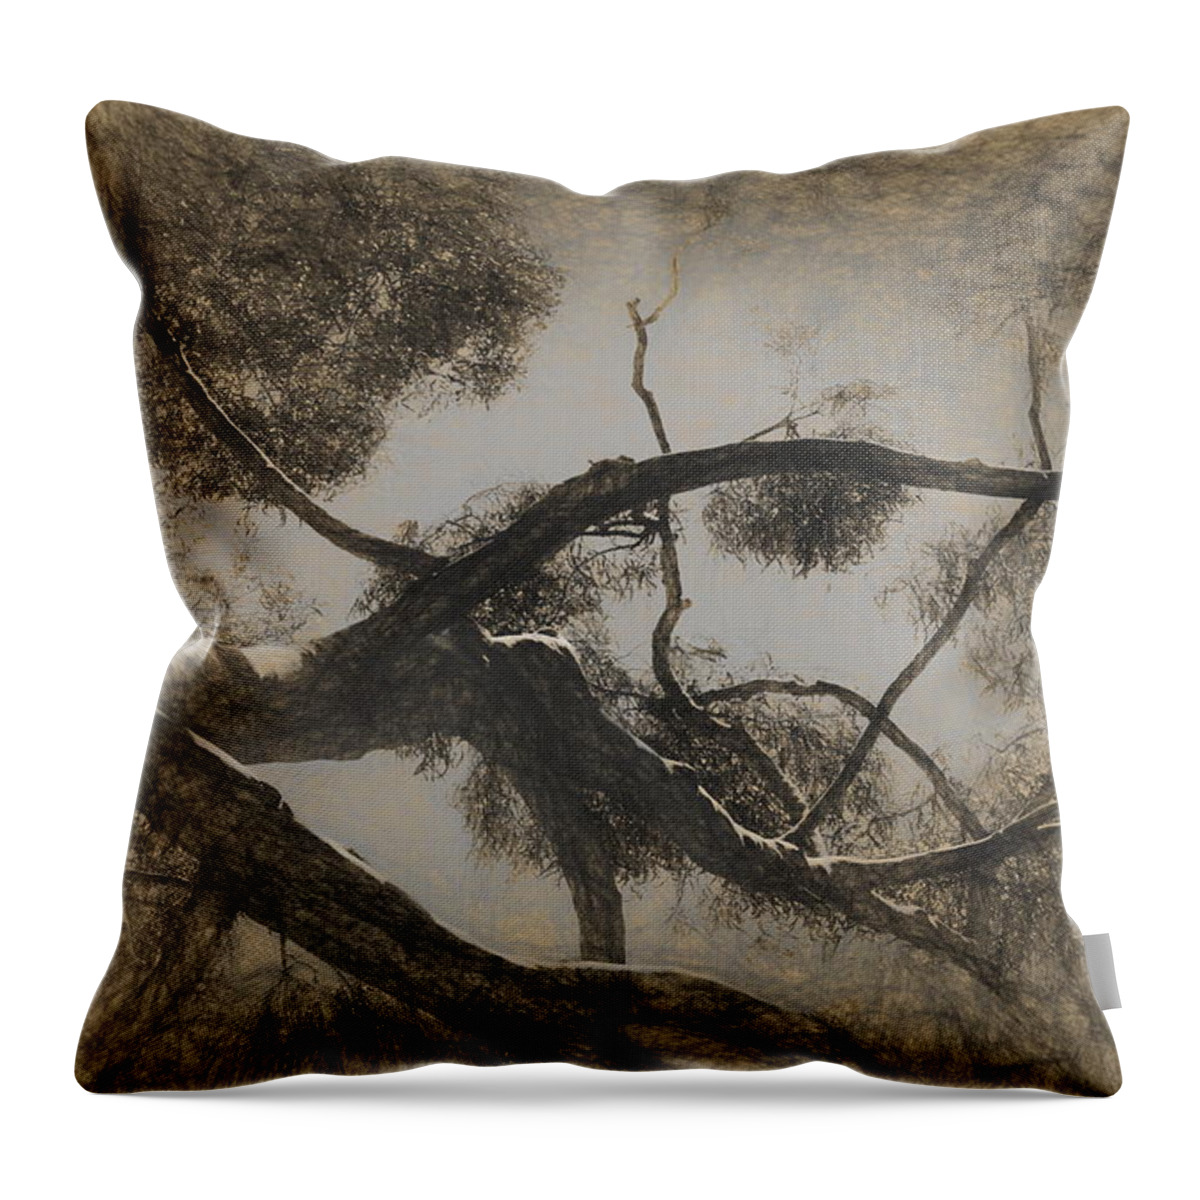 Tree Throw Pillow featuring the digital art Day Dreaming by Ernest Echols